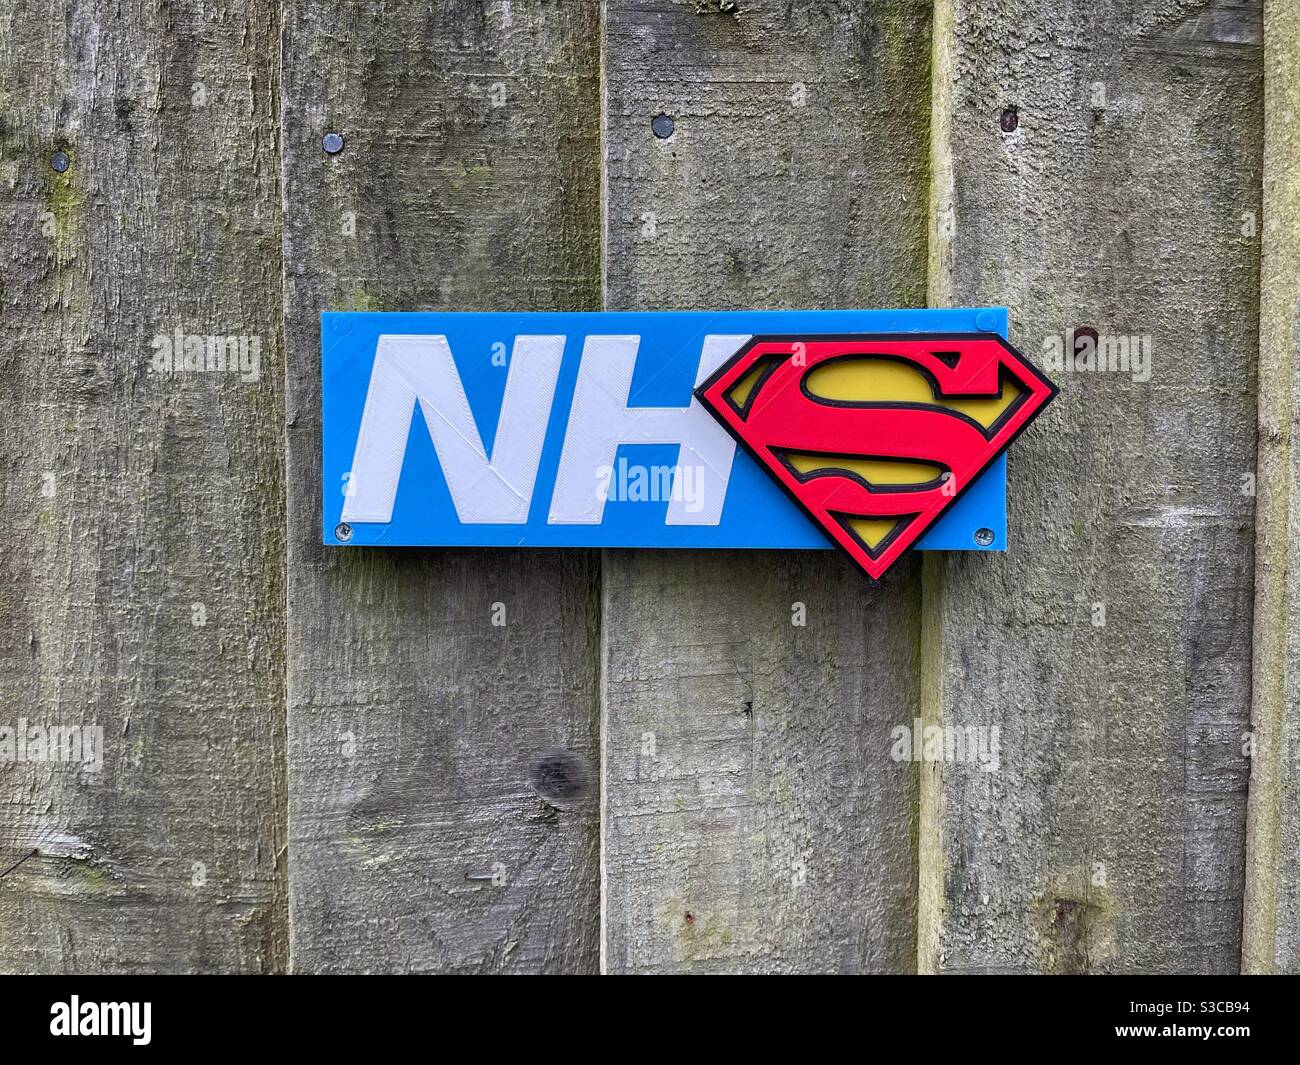 The real superheroes. NHS sign with superman symbol Stock Photo